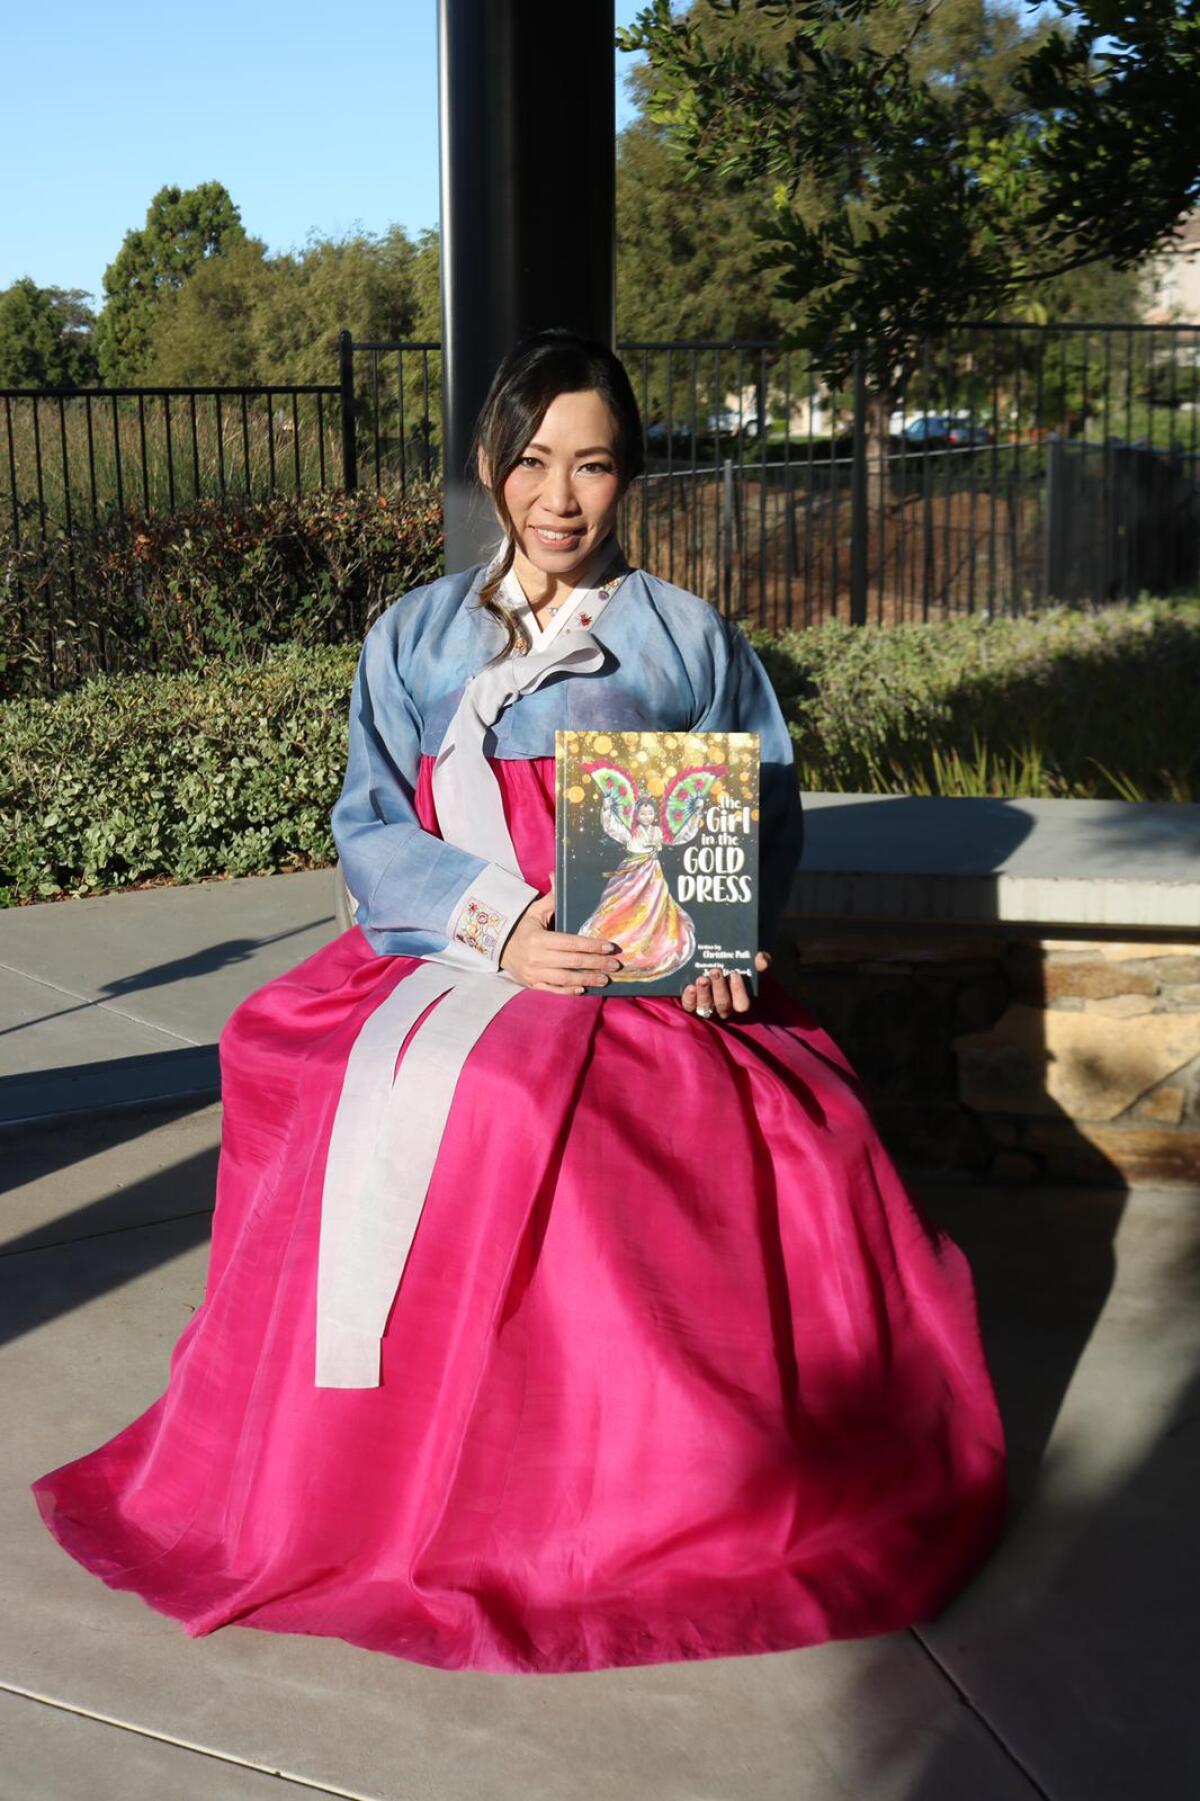 Author Christine Paik wears a hanbok like the character in "The Girl in the Gold Dress."